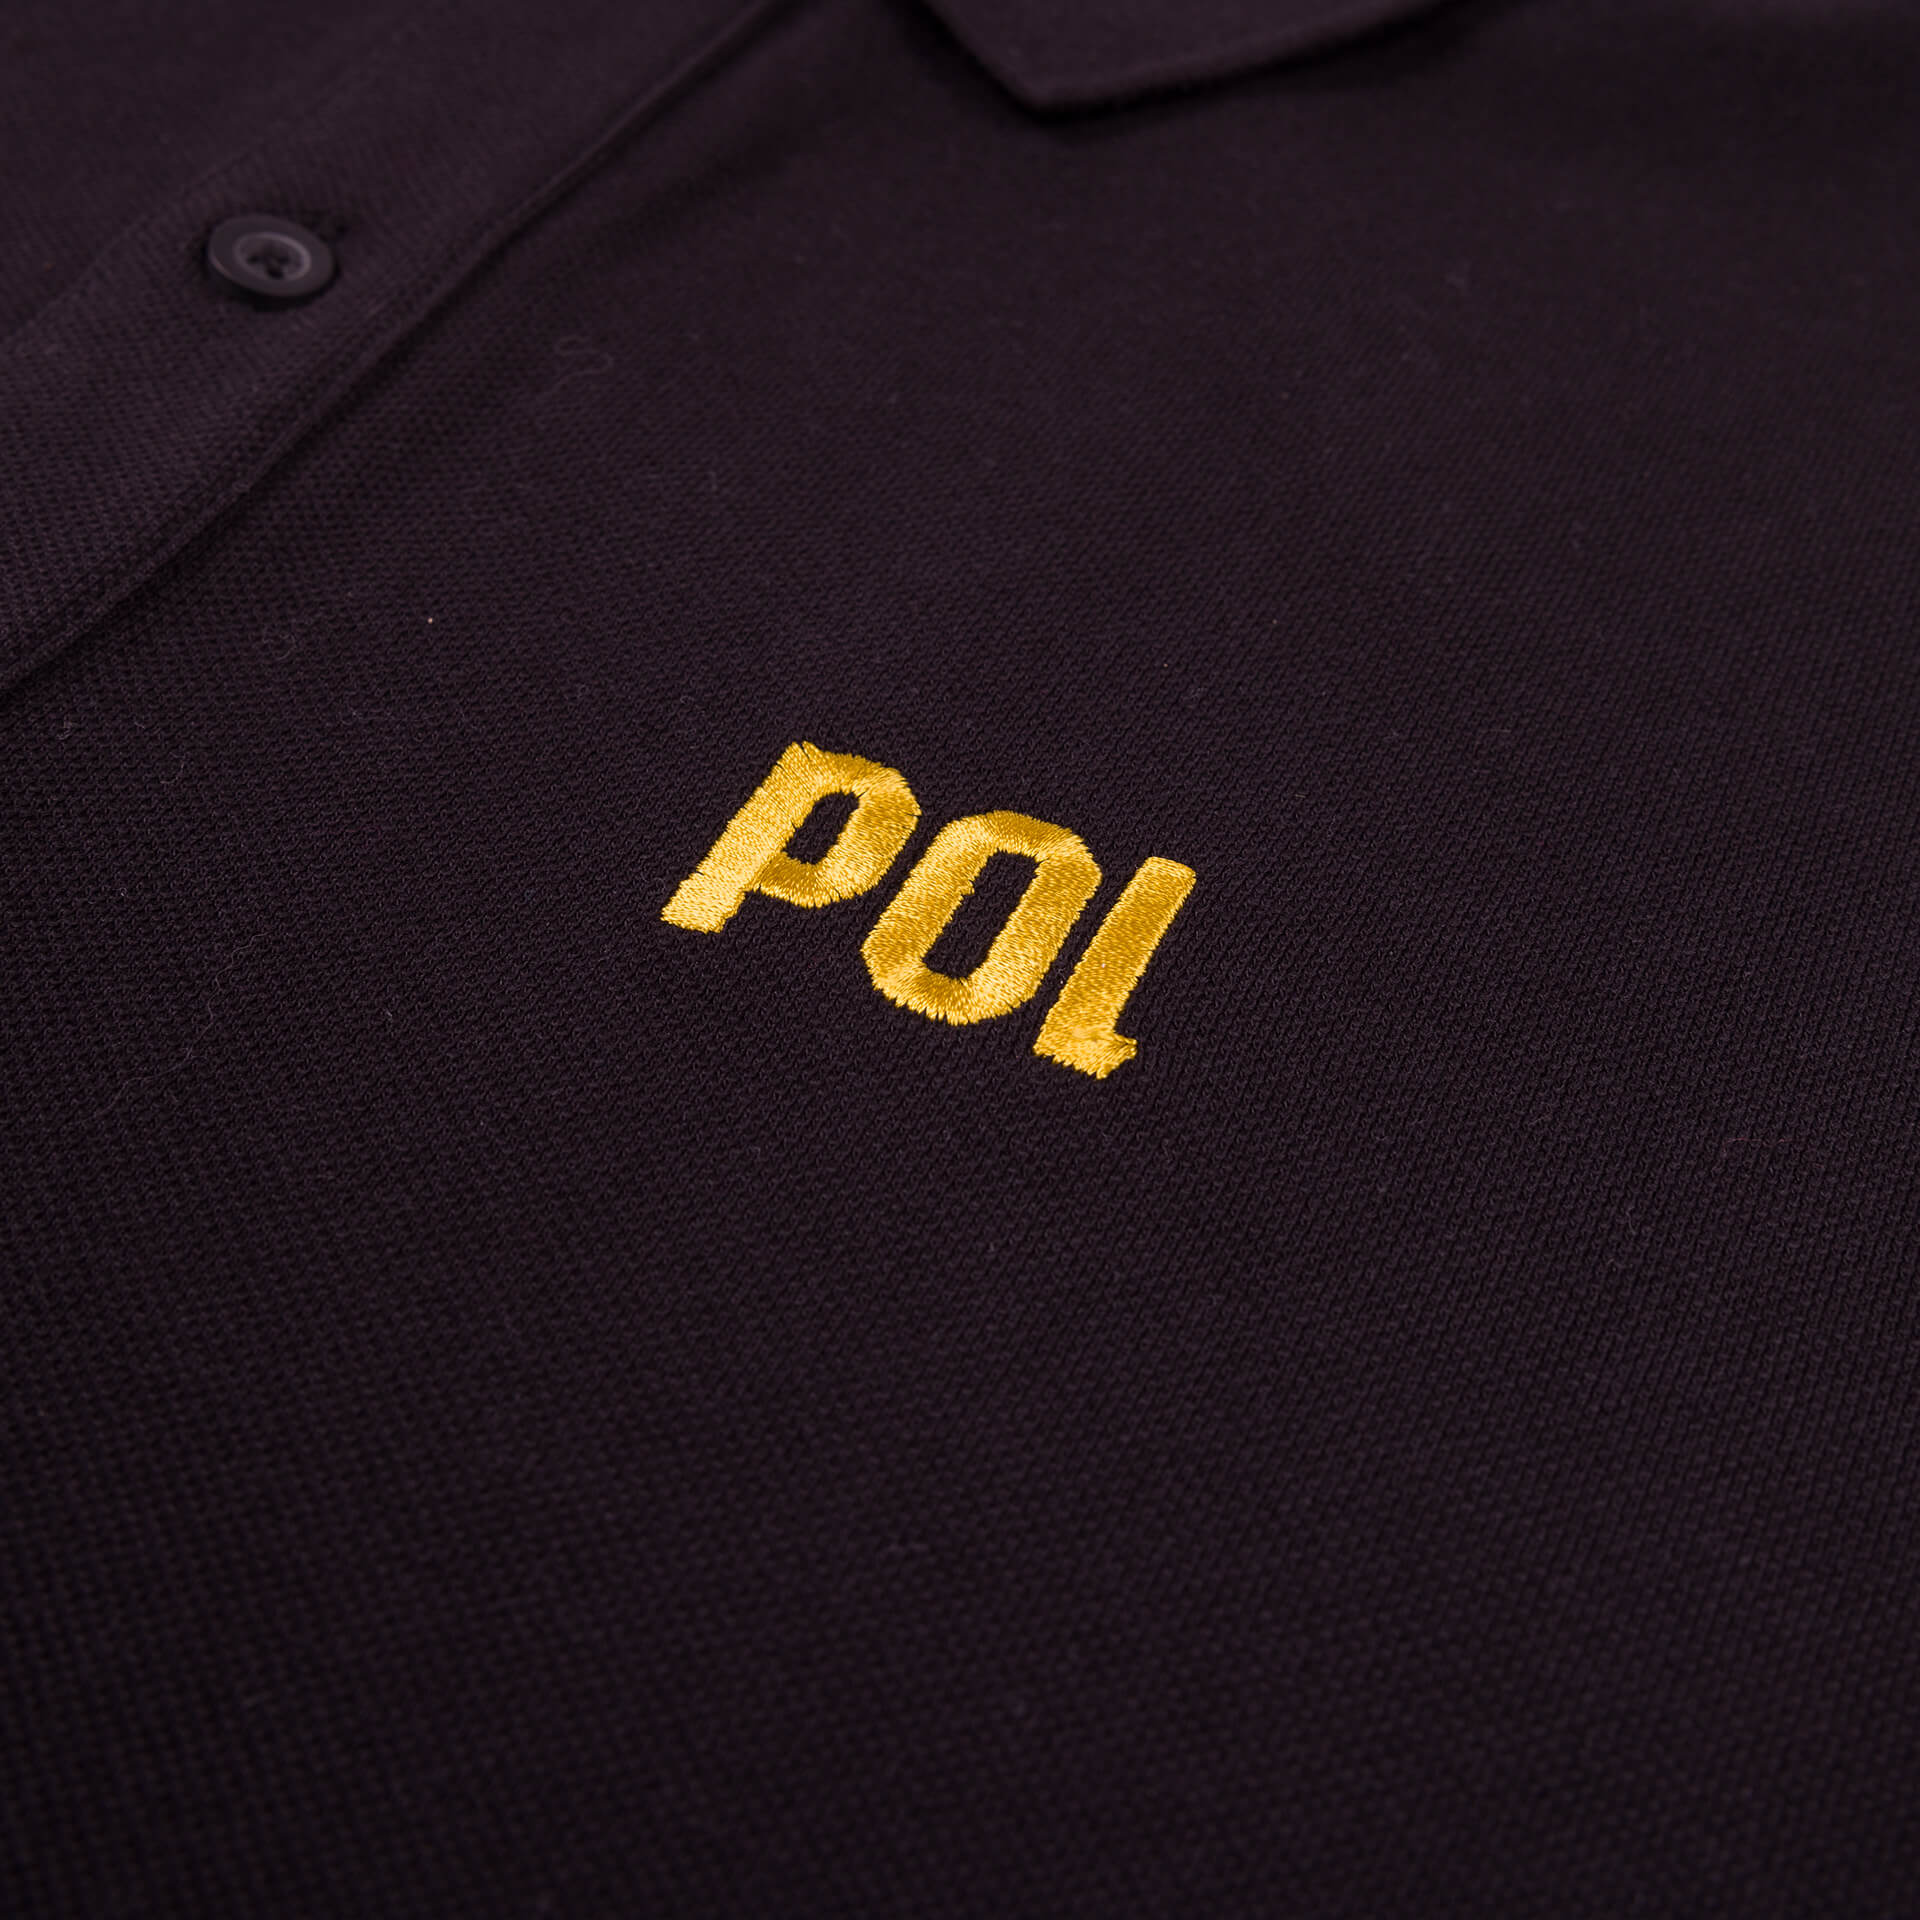 RSCA P10 polo black is-hover